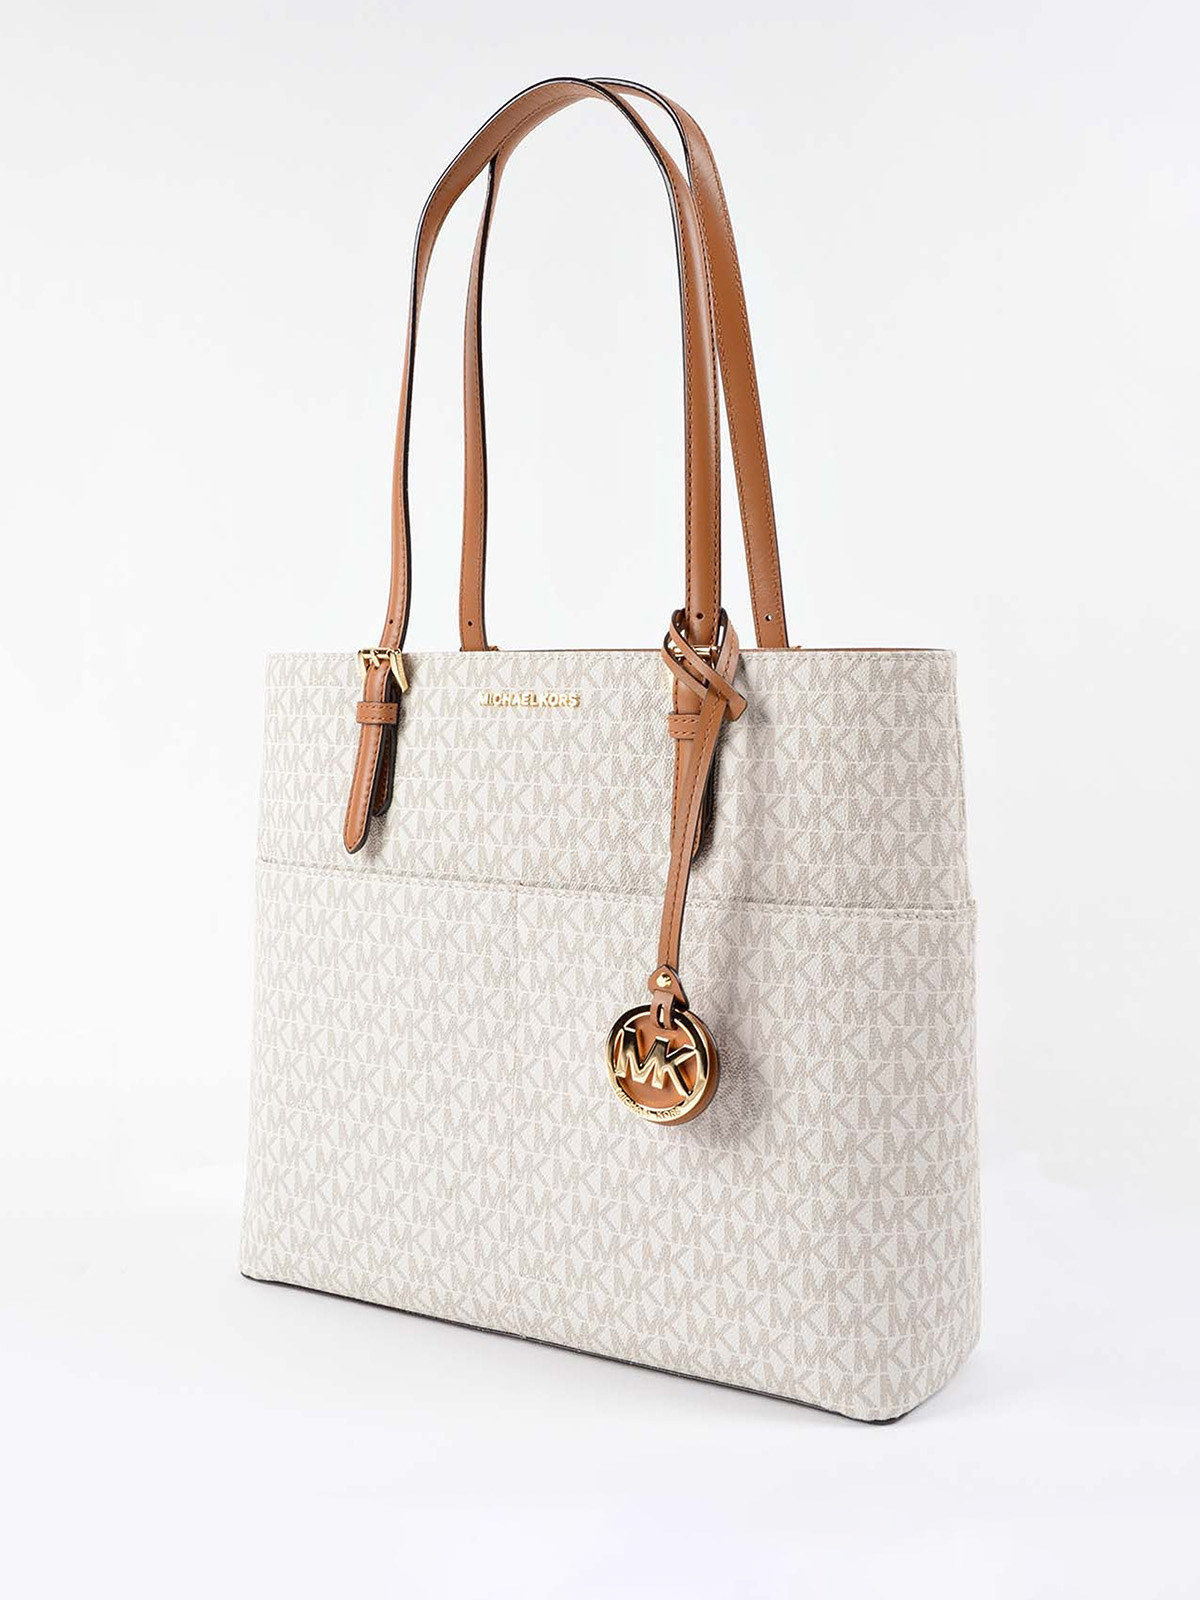 Bedford large tote by Michael Kors - totes bags | Shop online at www.semadata.org - 30S7GBFT3V150